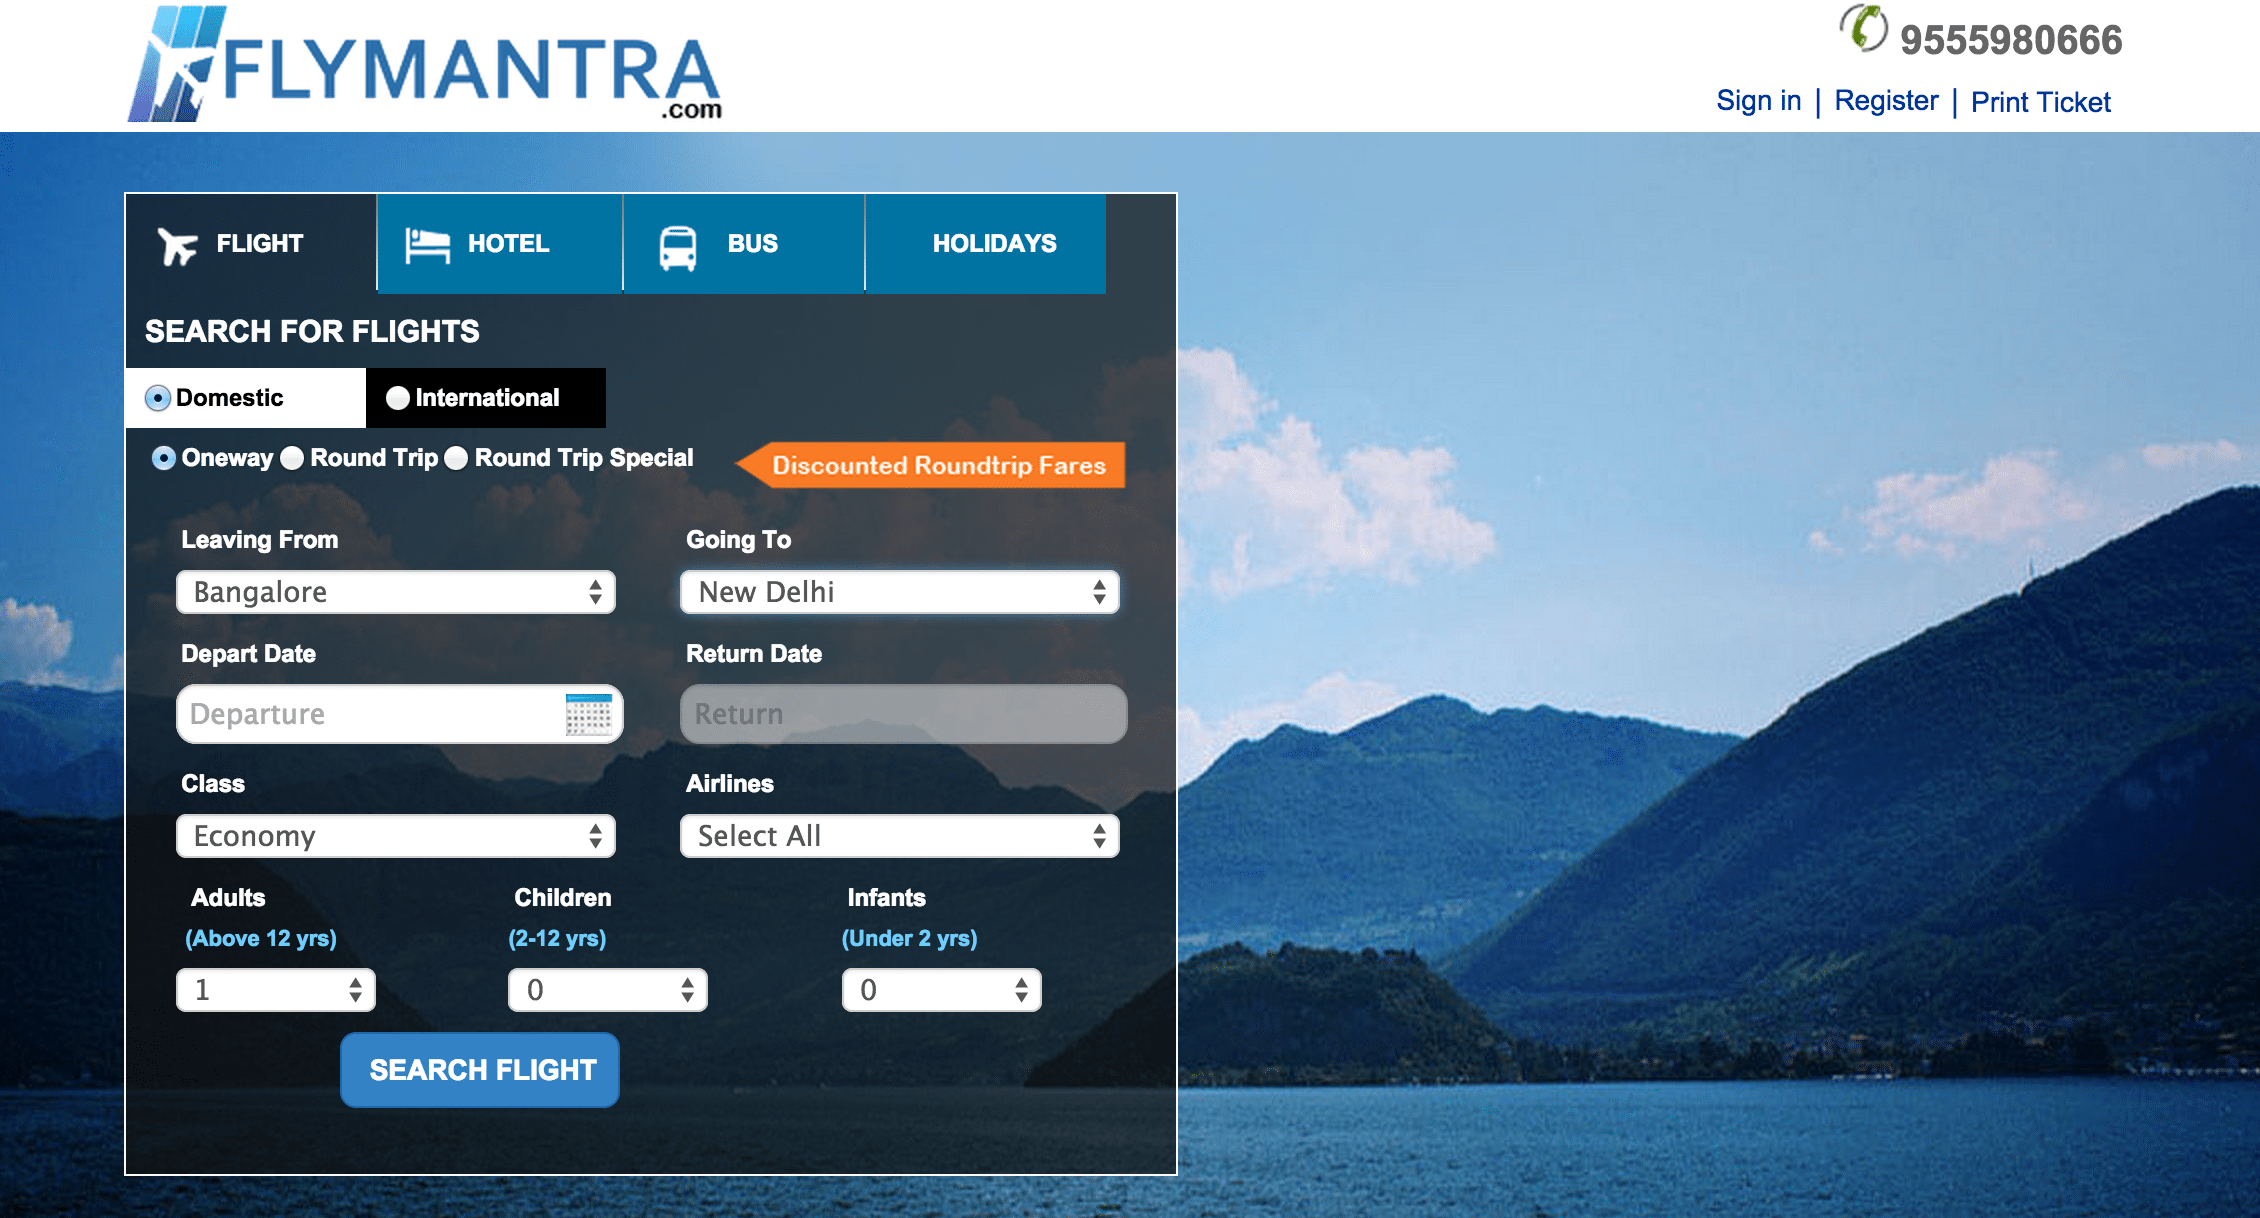 FlyMantra is a booking site for flights, hotels and busses in India.